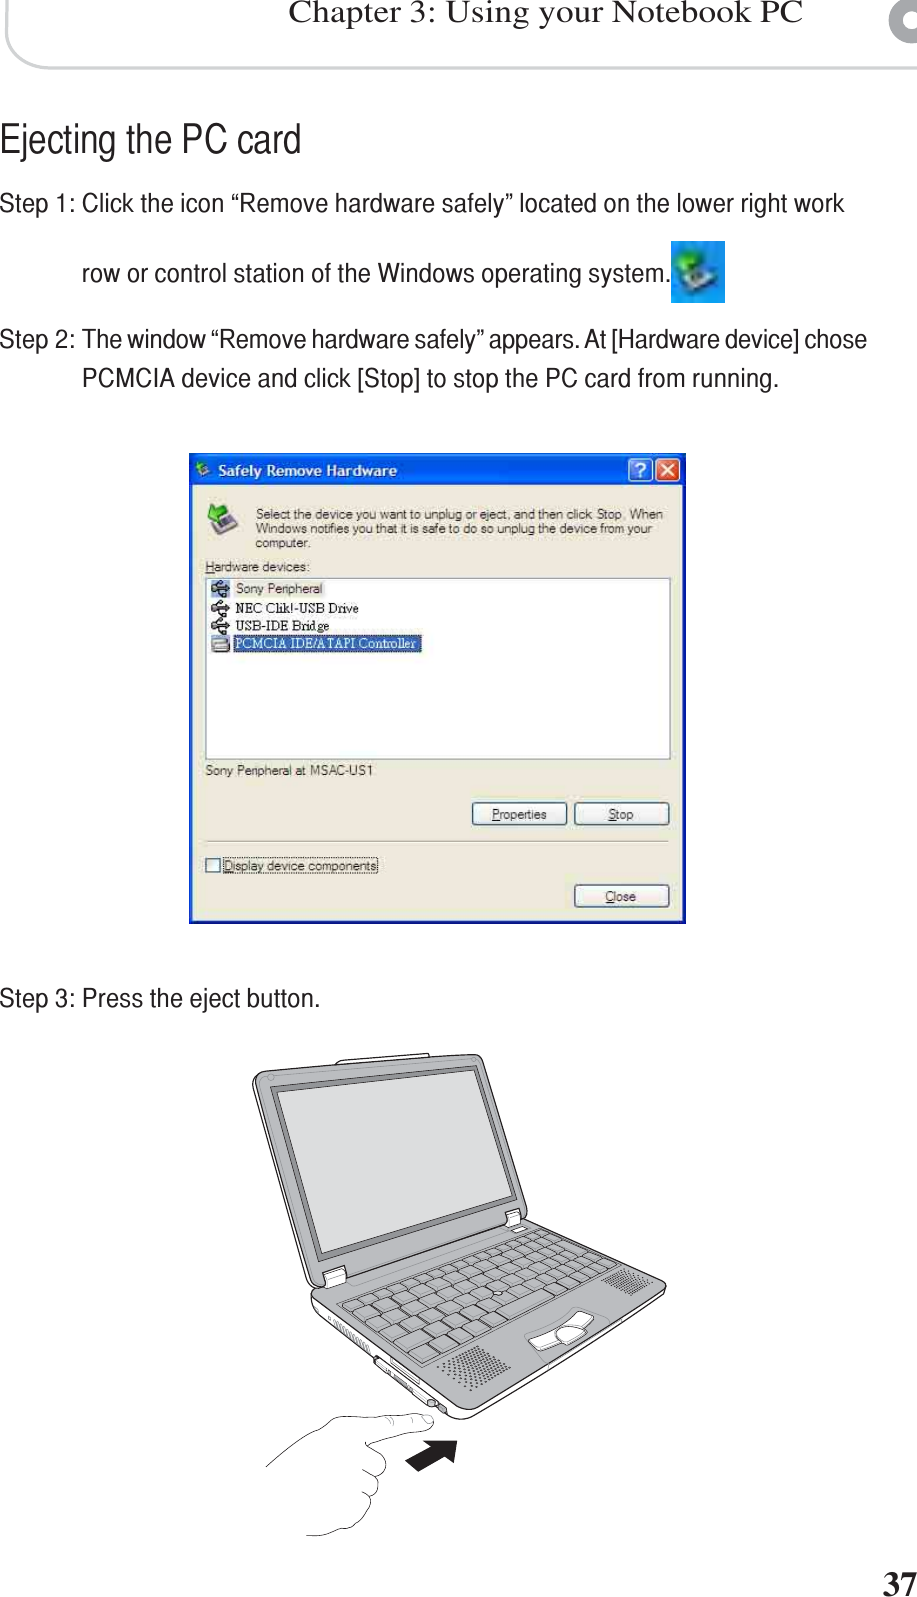 37Chapter 3: Using your Notebook PCEjecting the PC cardStep 1: Click the icon “Remove hardware safely” located on the lower right workrow or control station of the Windows operating system.Step 2: The window “Remove hardware safely” appears. At [Hardware device] chosePCMCIA device and click [Stop] to stop the PC card from running.Step 3: Press the eject button.